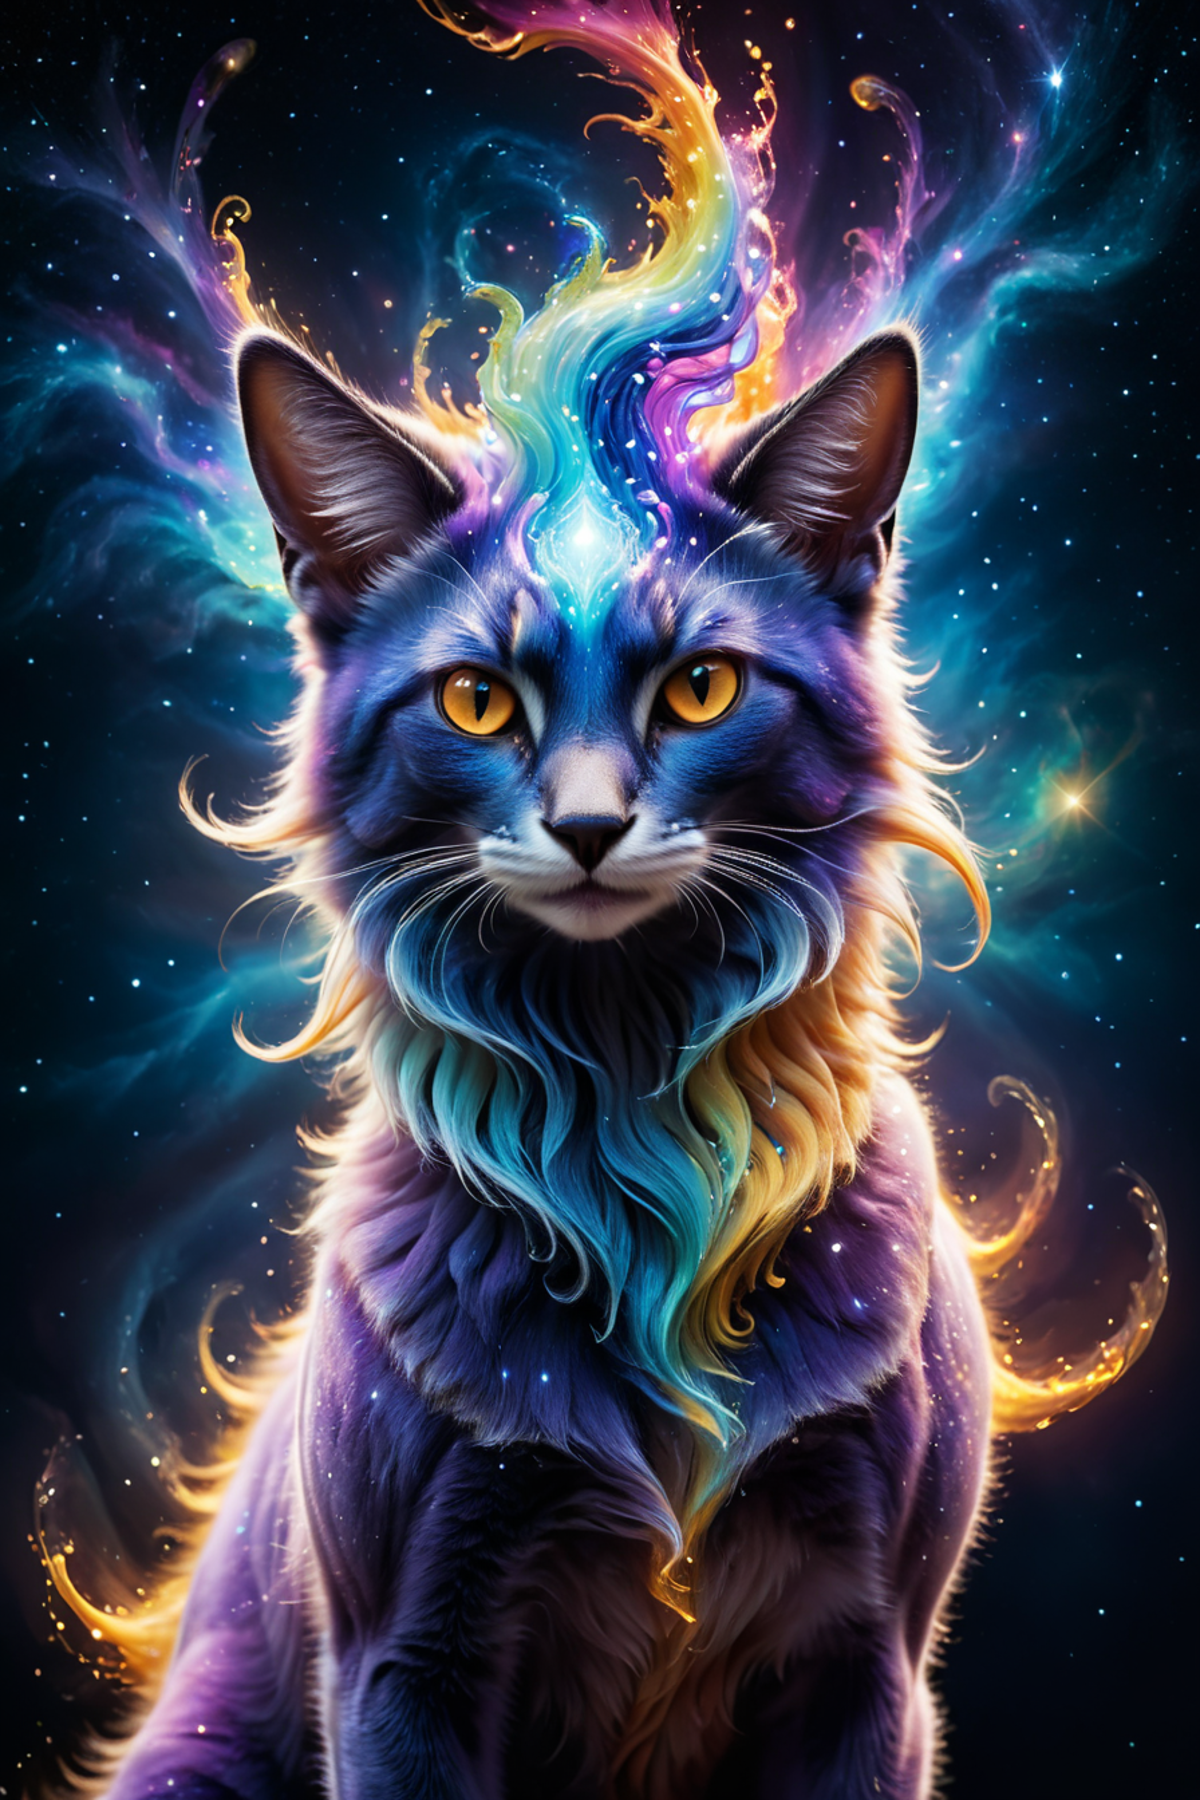 Artistic Digital Painting of a Cat with Purple and Blue Fur and Yellow Eyes.